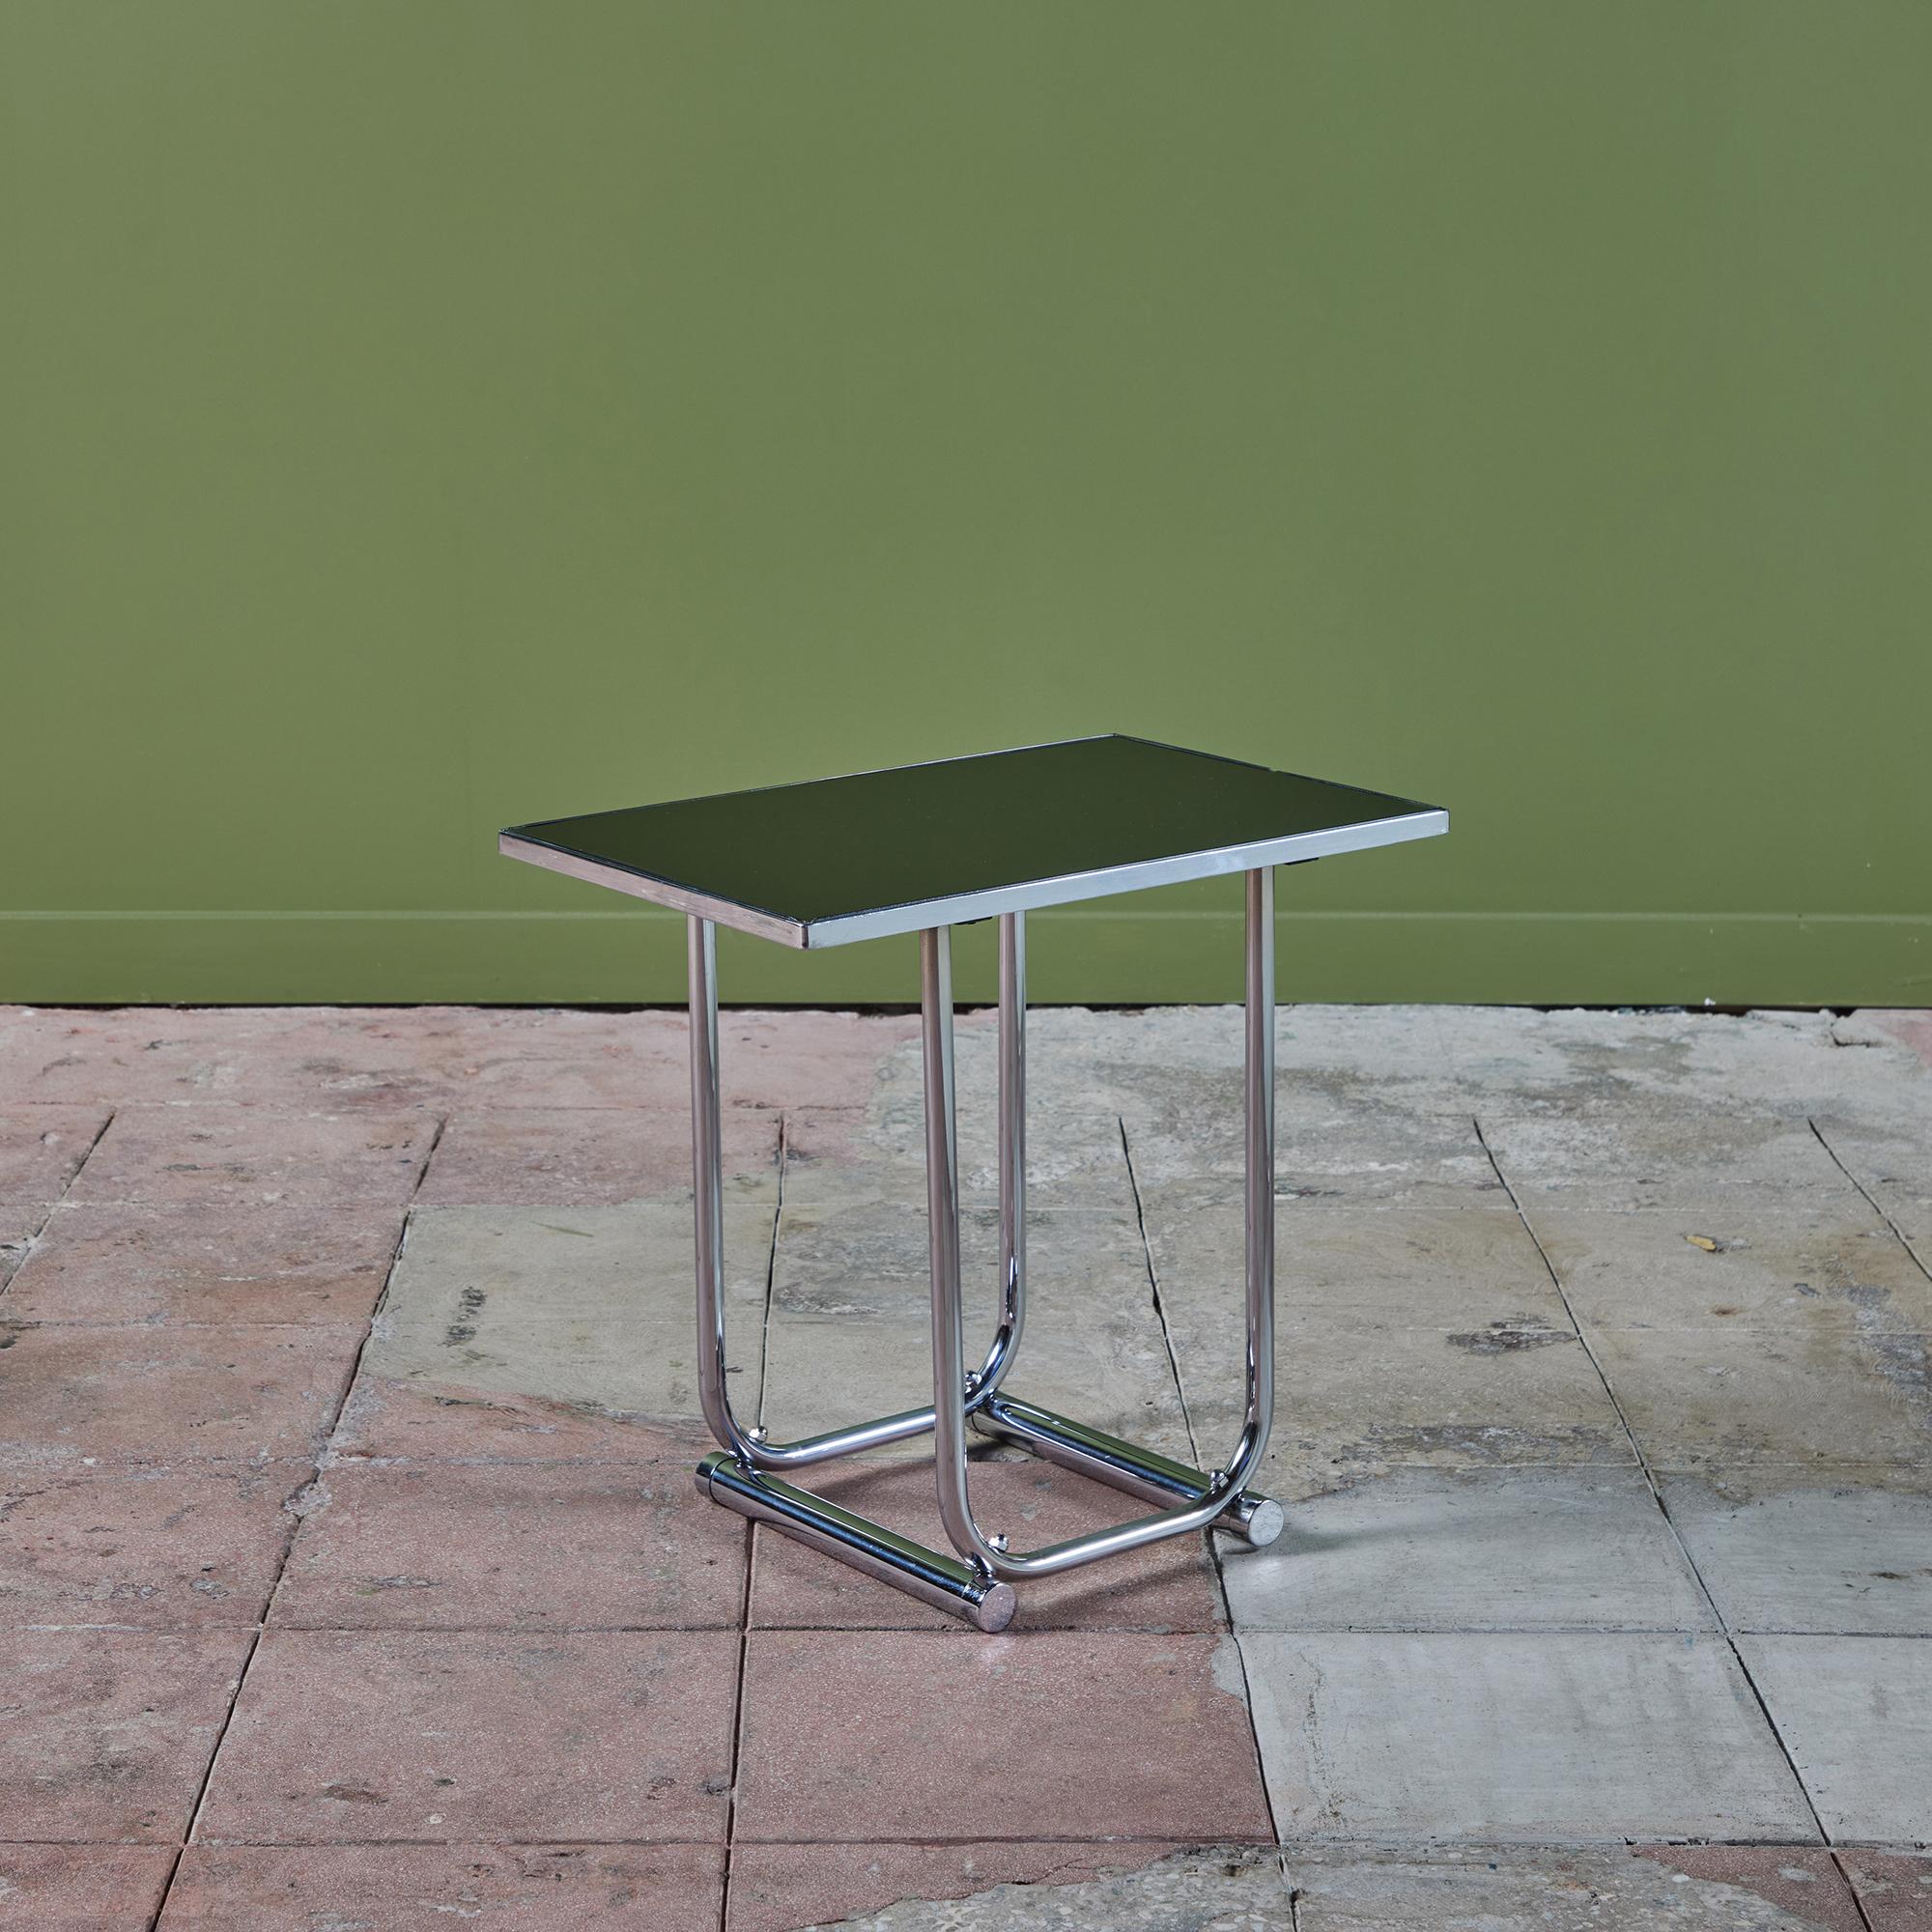 Art deco rectangular side table in the style of Warren McArther. The table features a bent tubular steel frame with a black glass table top.

Dimensions
20